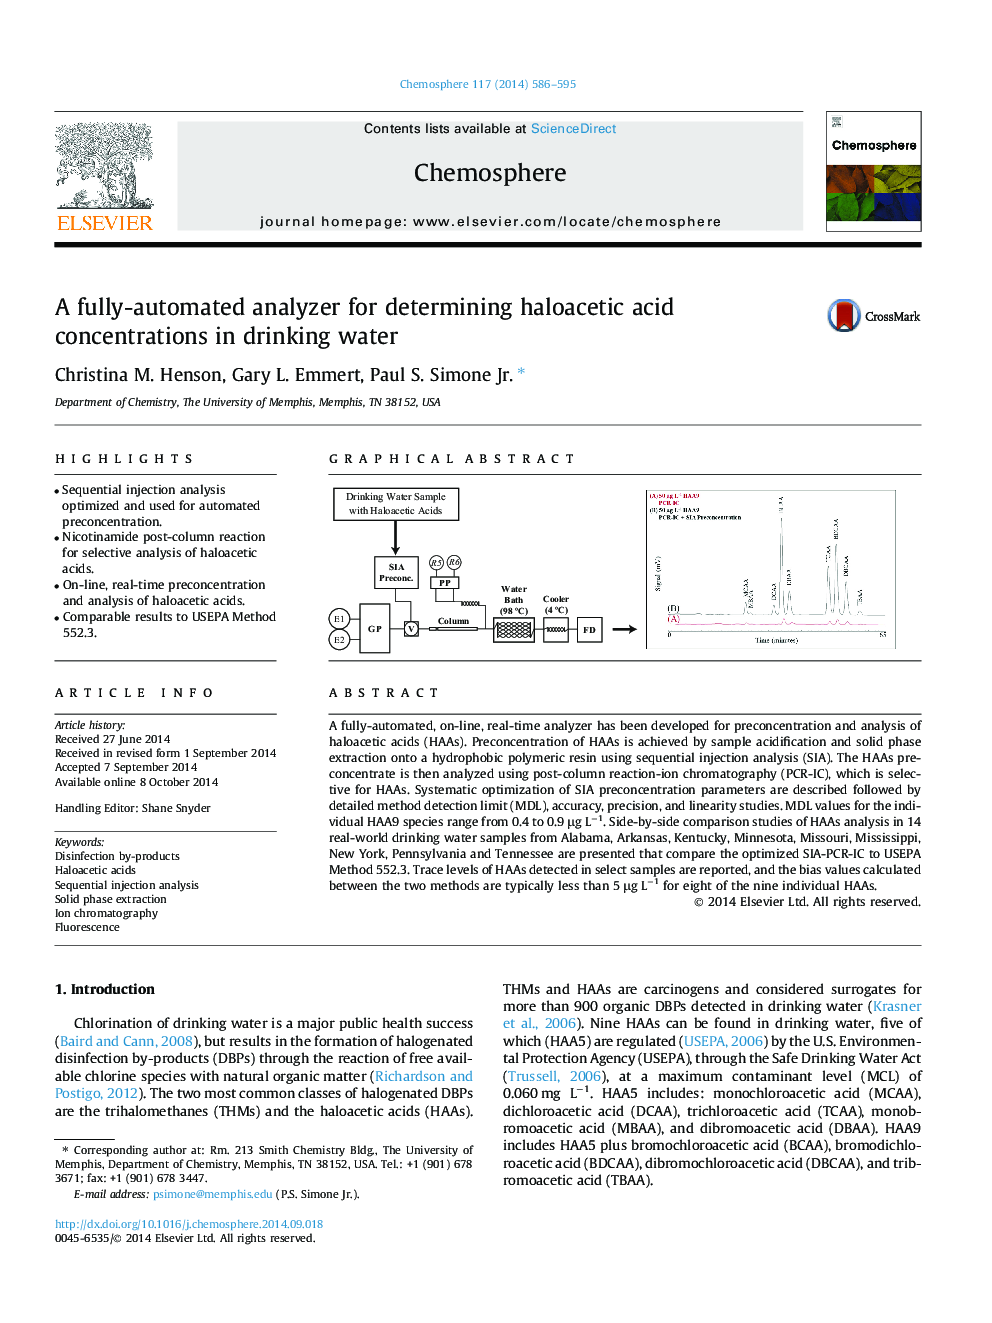 A fully-automated analyzer for determining haloacetic acid concentrations in drinking water